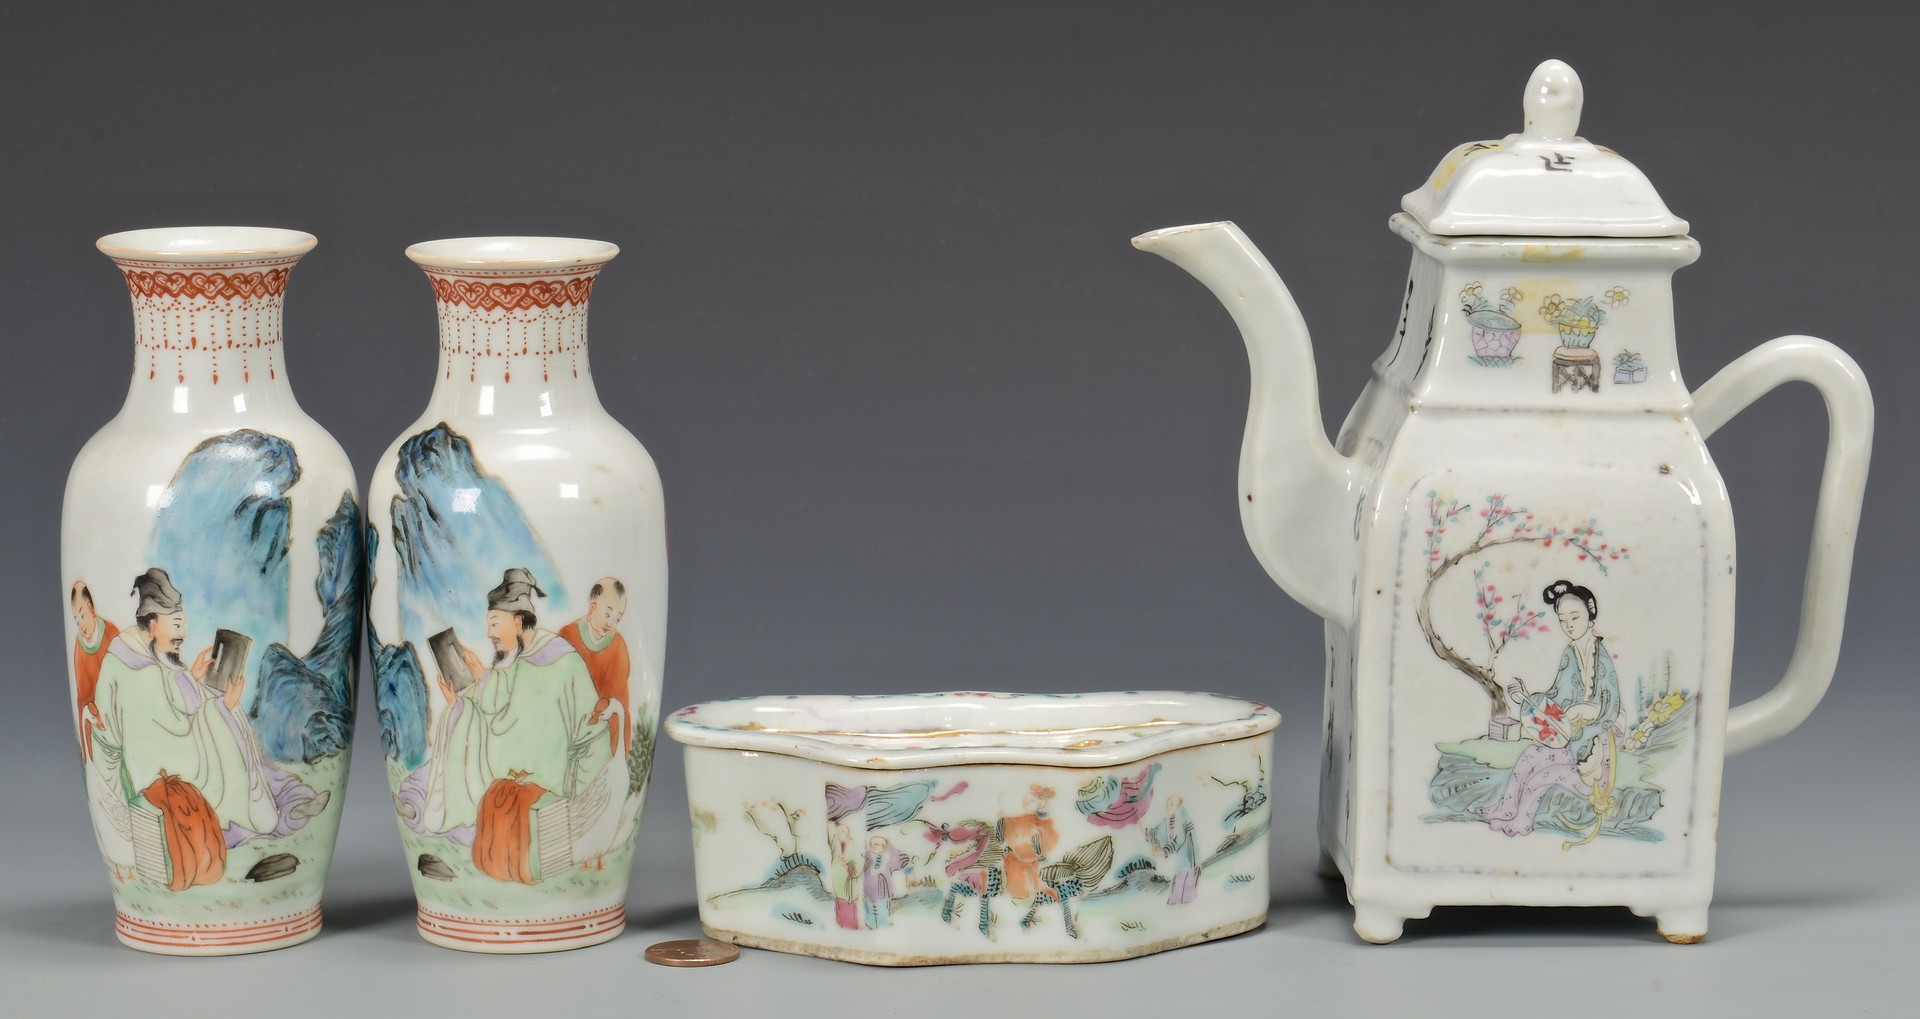 Lot 358: Grouping of early 20th c. Chinese Porcelain